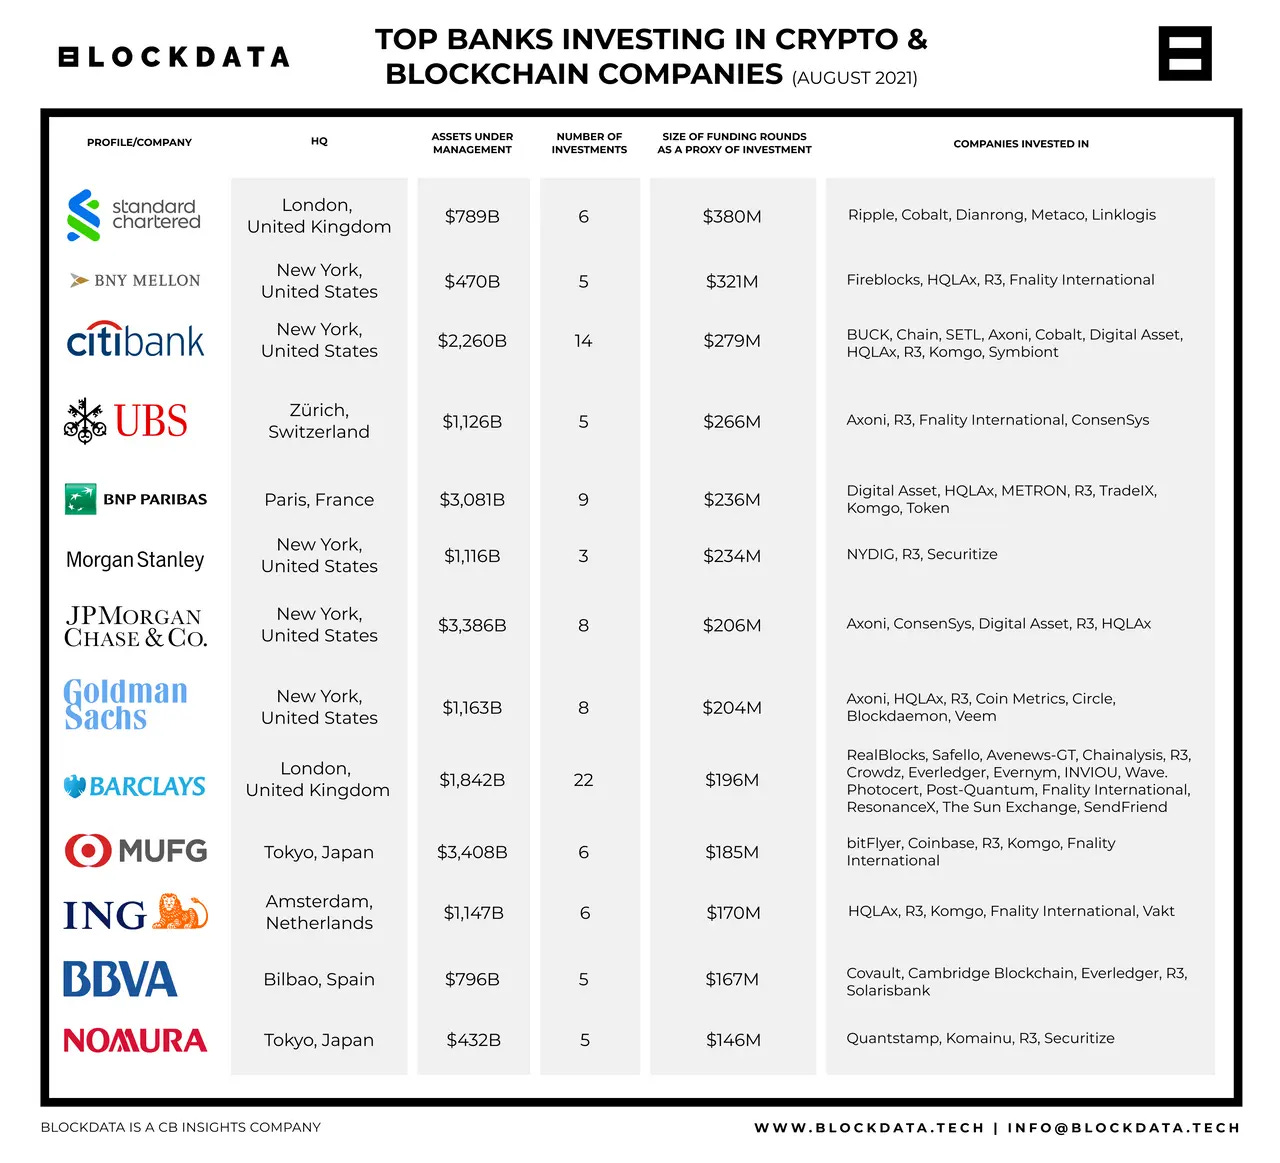 Top banks investing in crypto & Blockchain companies as of August 2021